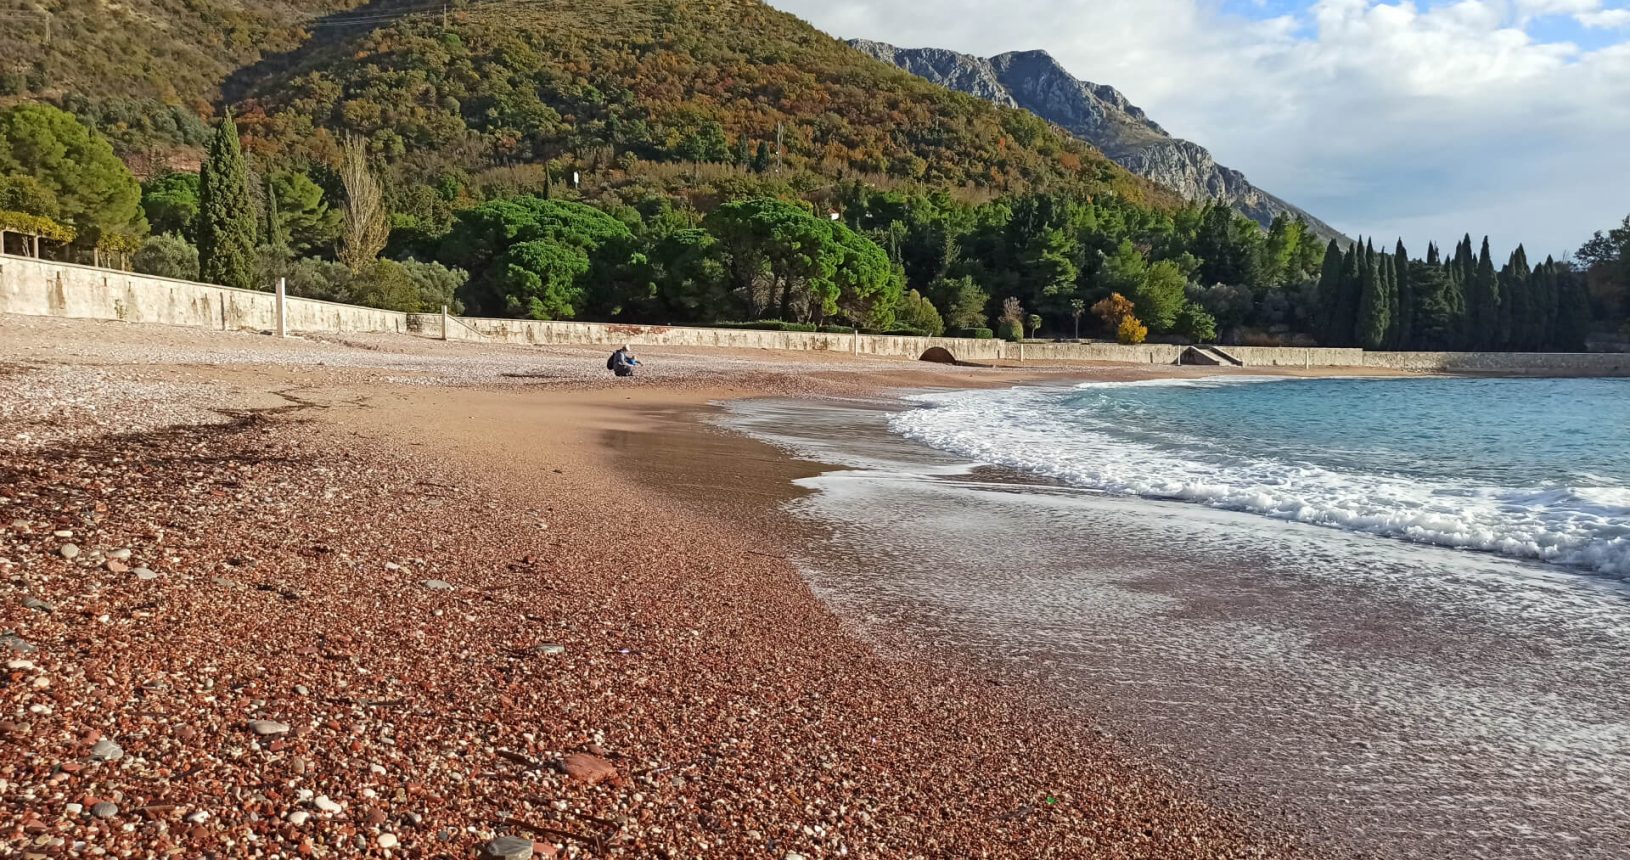 Milocer beach. The view to Milocer park and mountains